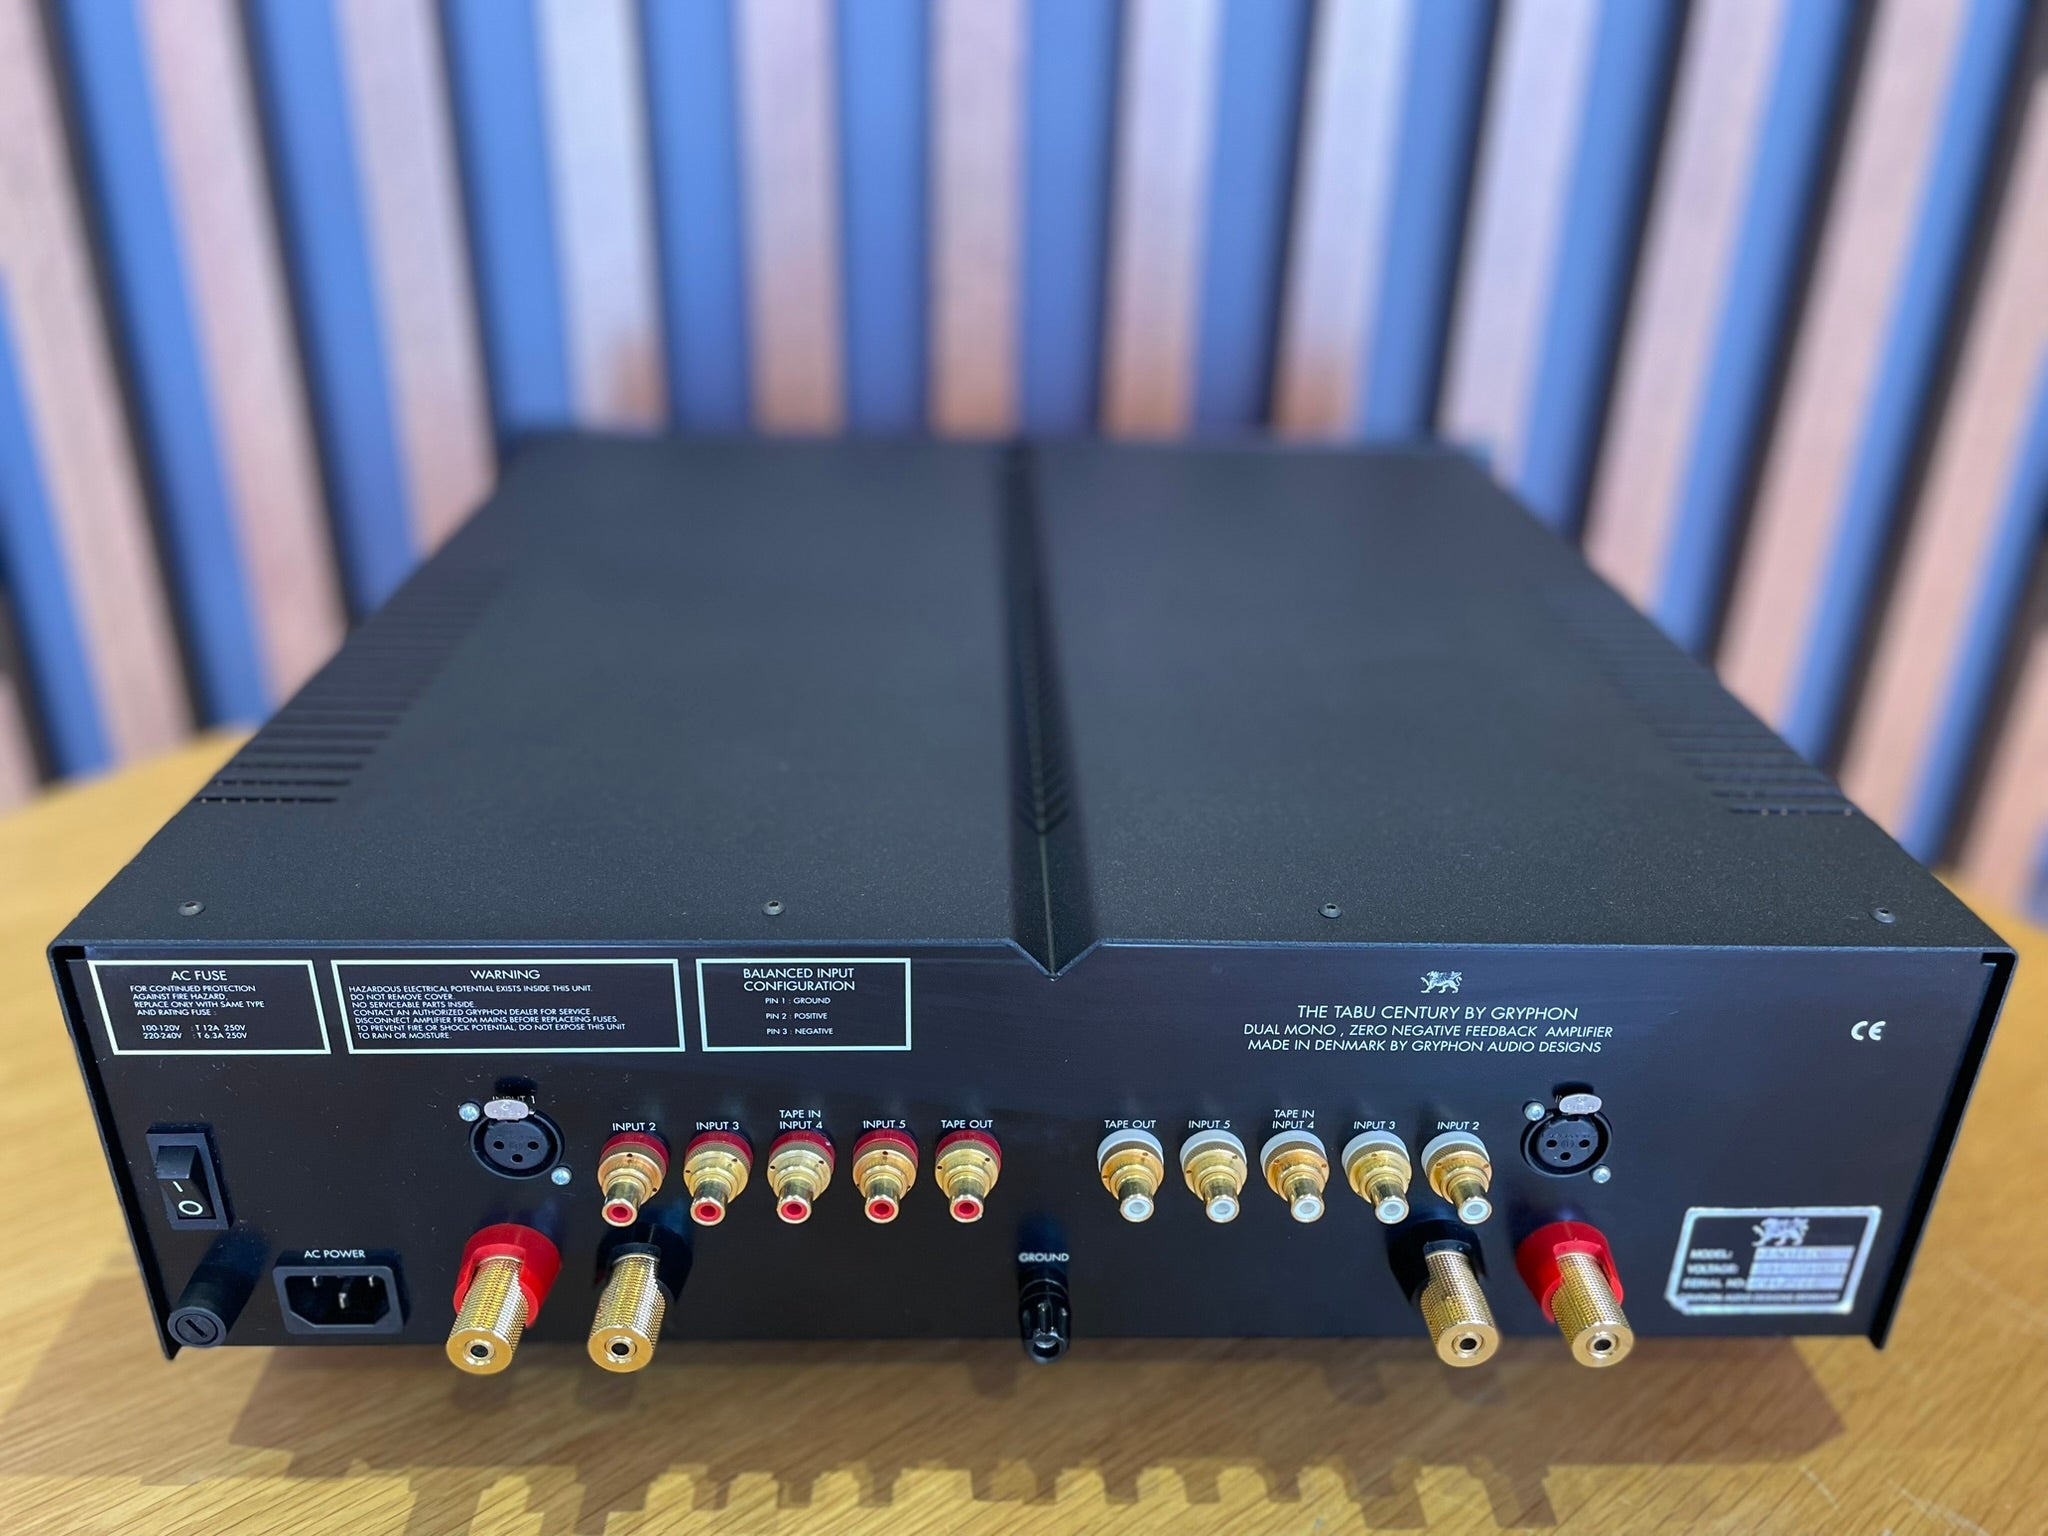 Gryphon Tabu Century Integrated Amplifier - As Traded